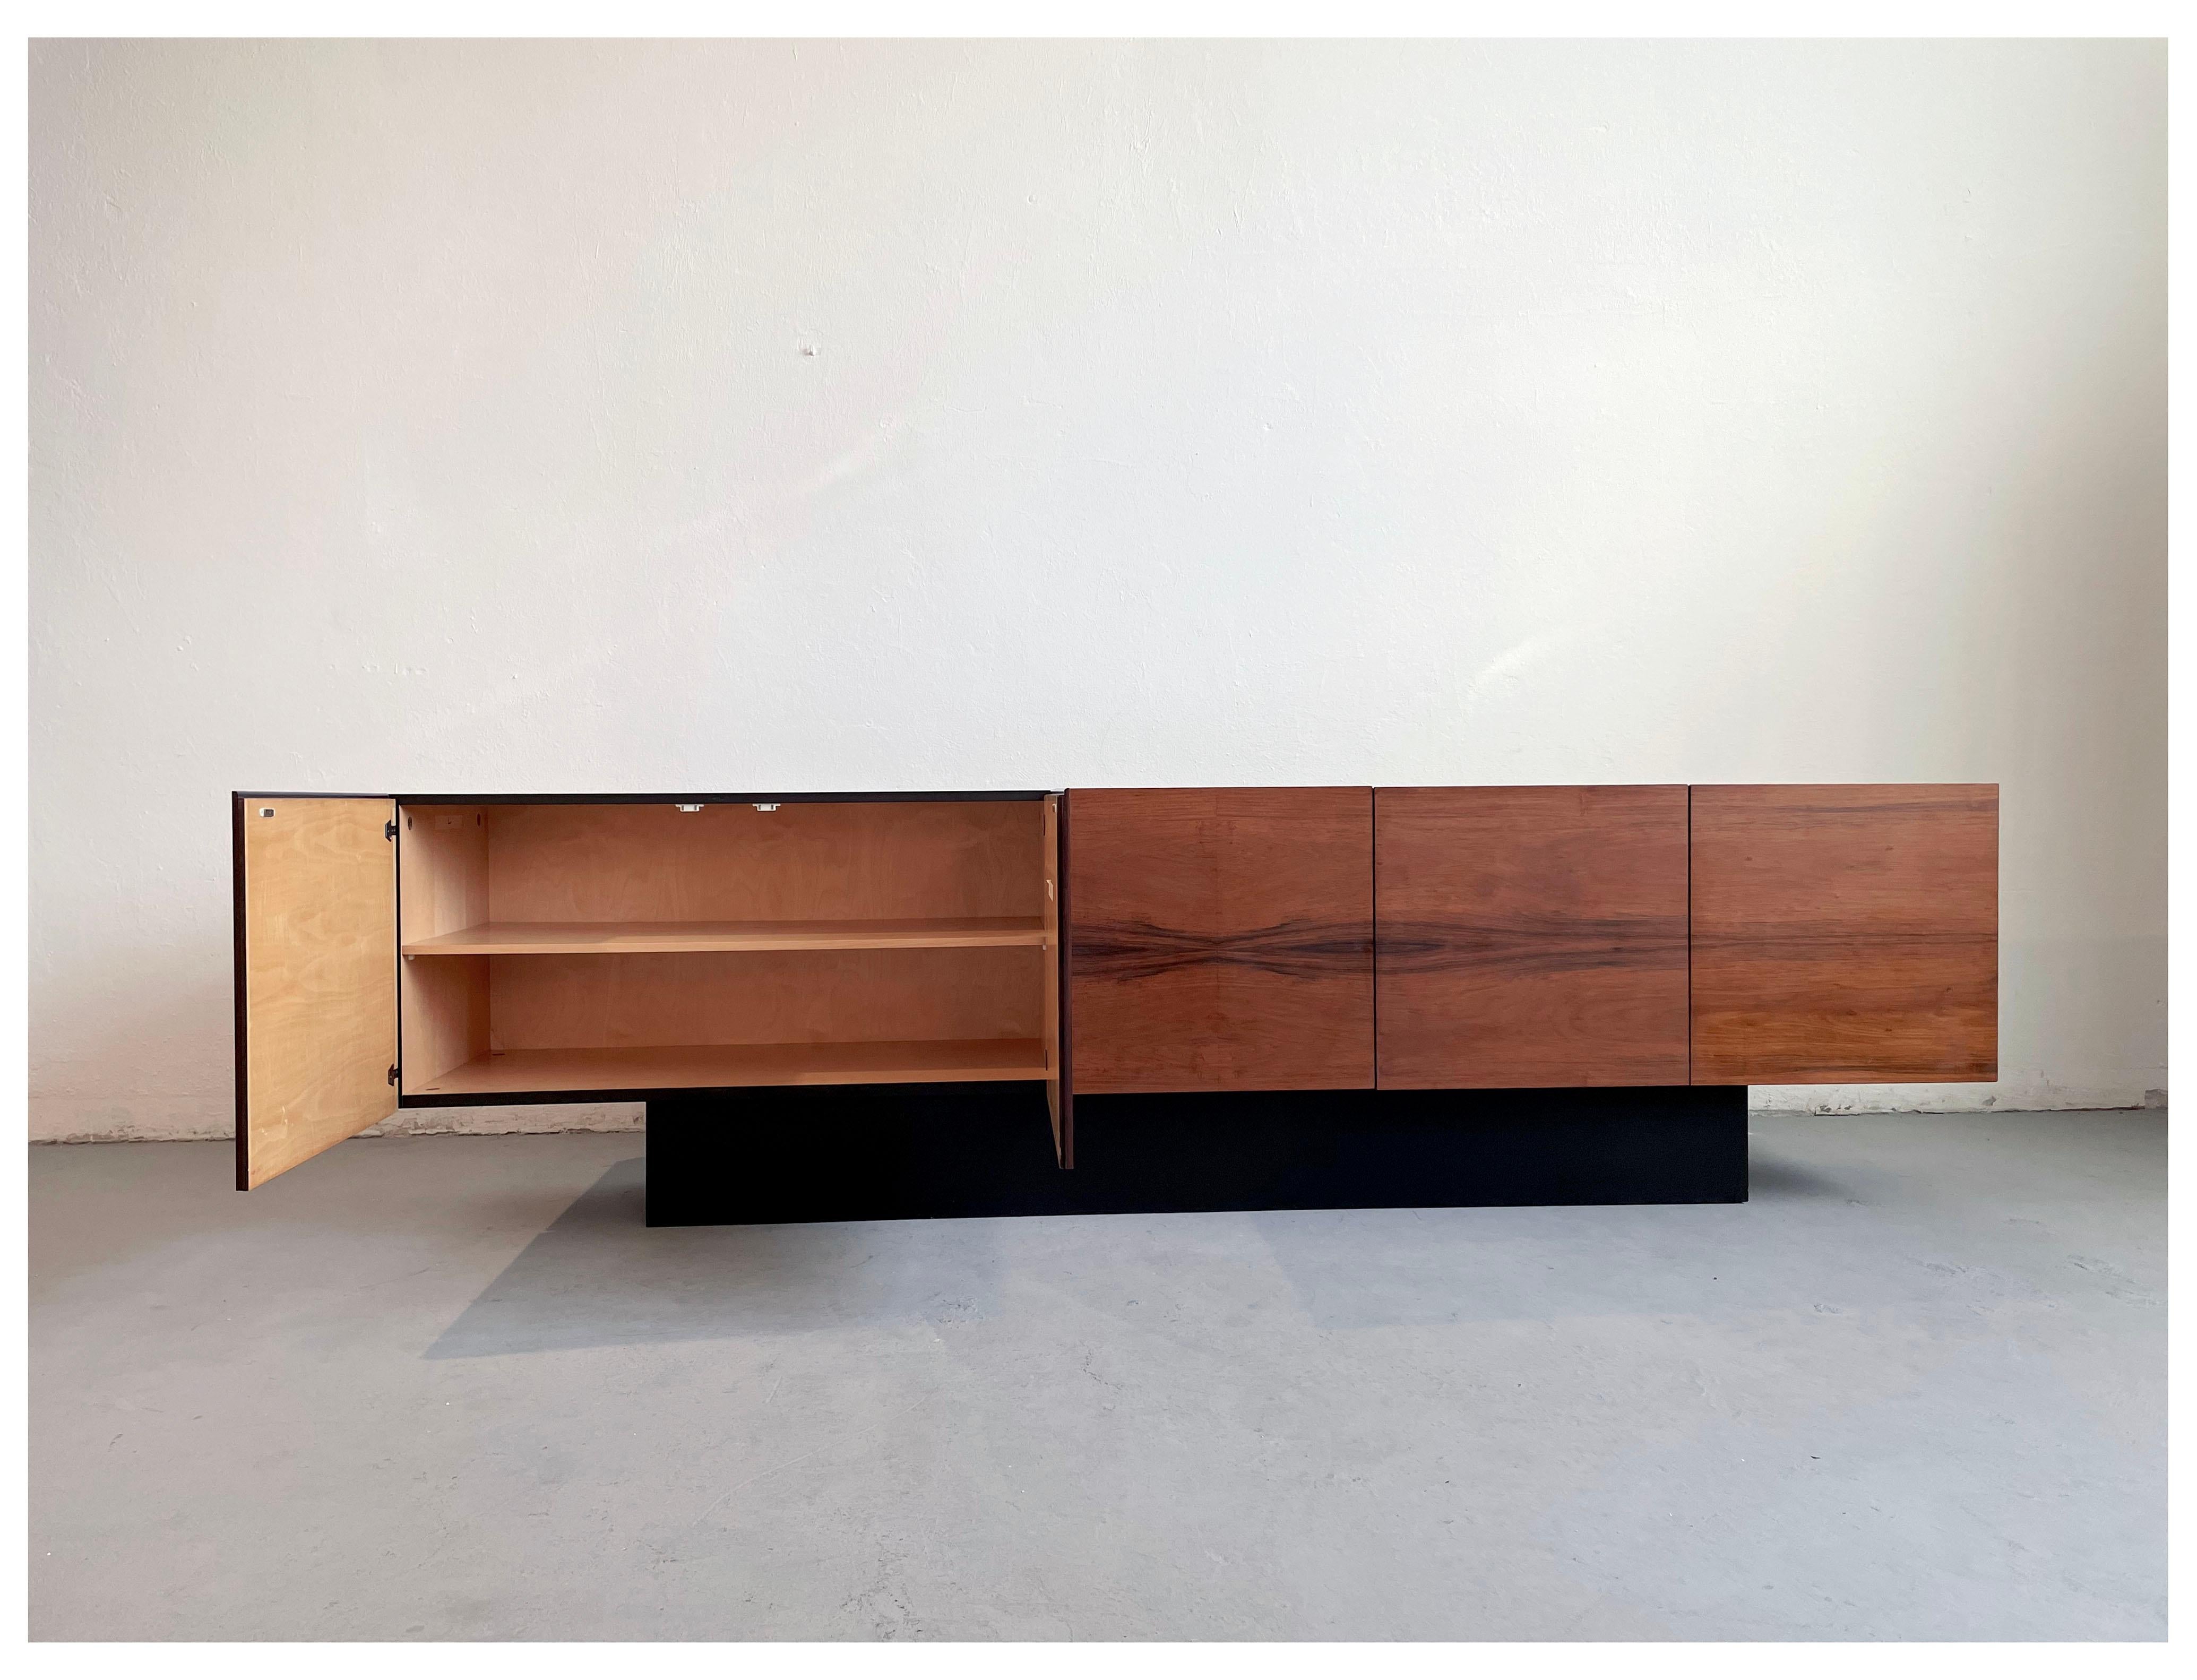 Very large vintage sideboard from the 1970s, minimalist design, and monumental proportions

The sideboard is made of wood veneered in black Formica and Rio rosewood

Visually most impressive are the five minimalist front doors made of Rio